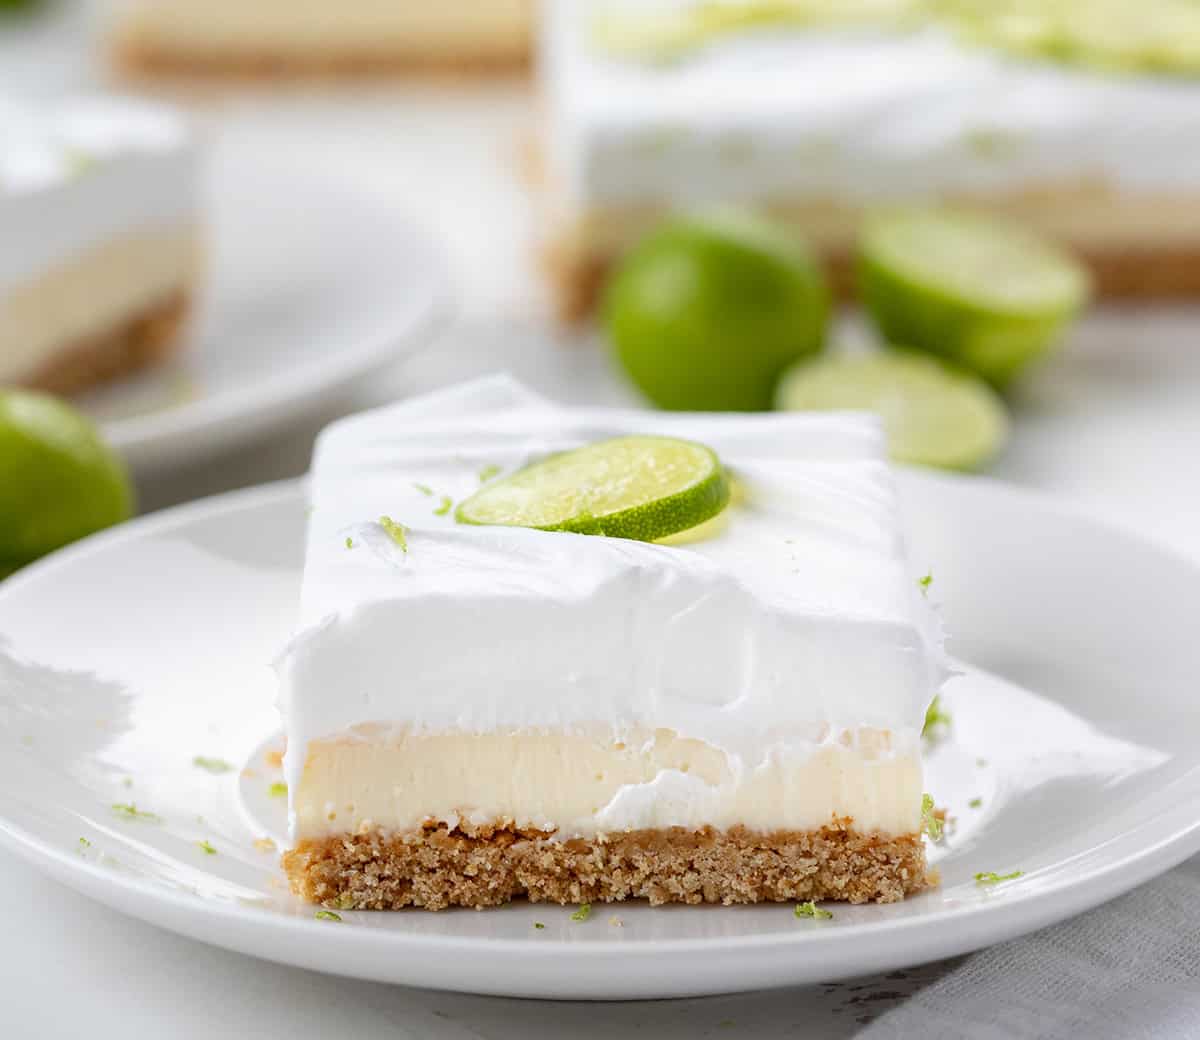 One Key Lime Pie Bar on a white plate on a white counter.